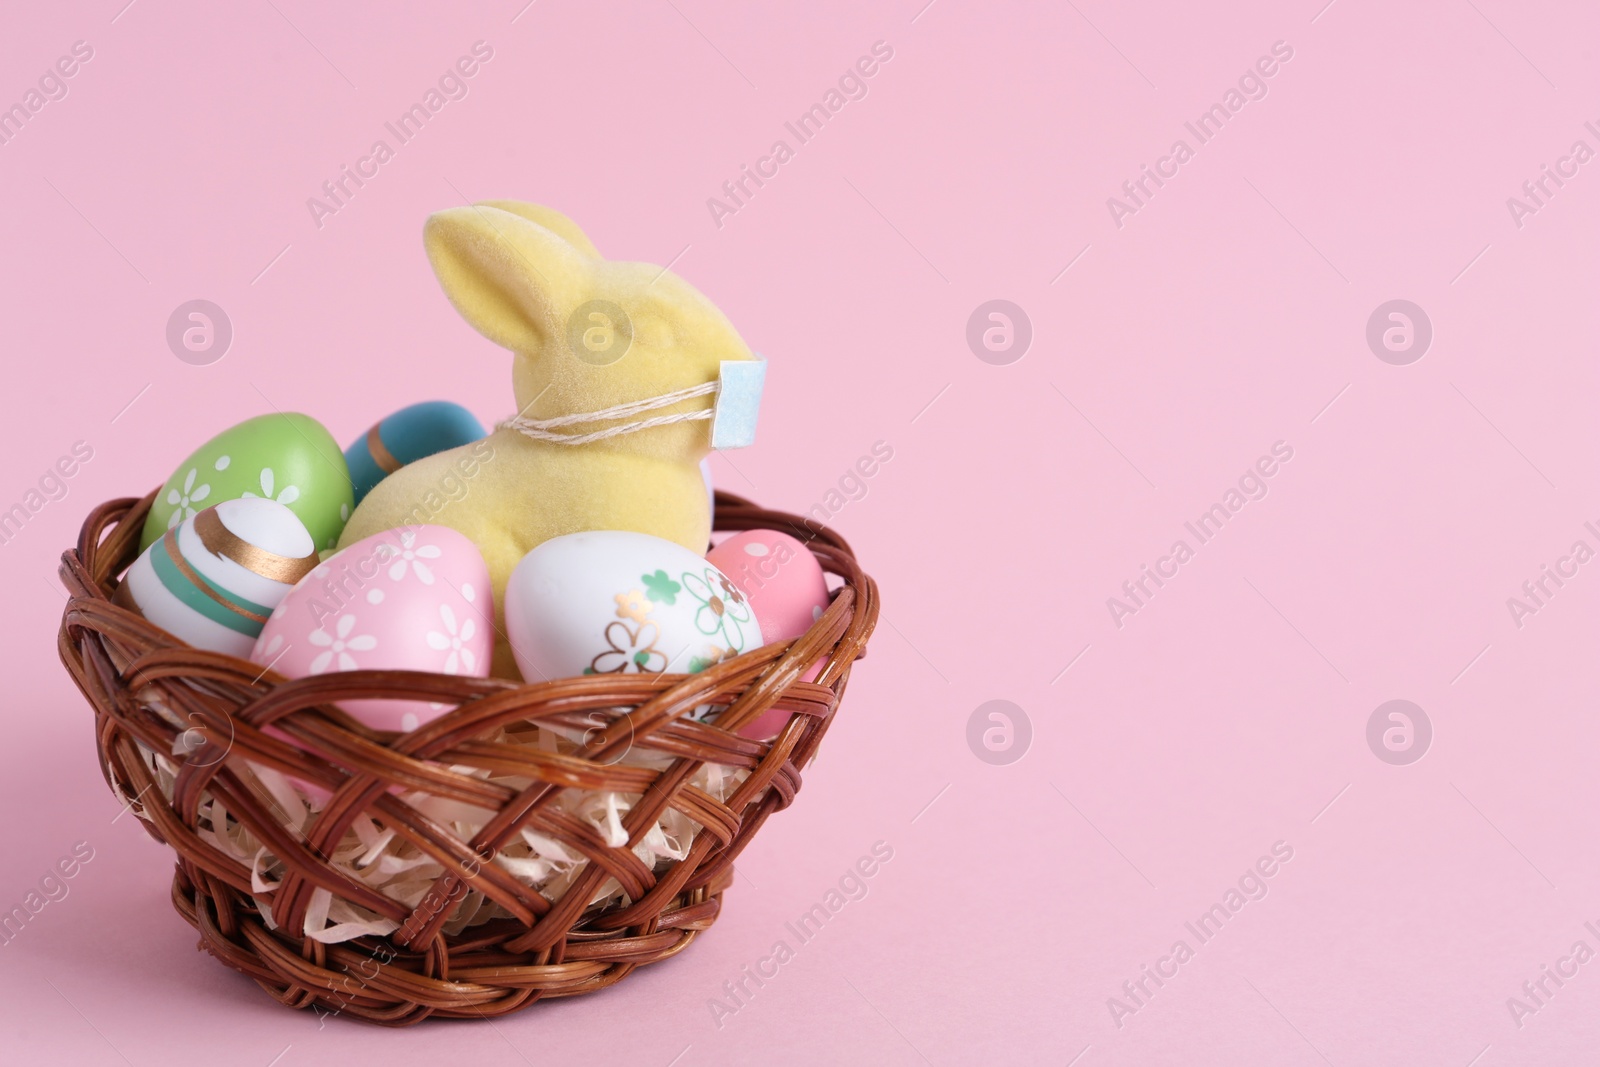 Photo of Cute bunny figure with protective mask and eggs in wicker basket on pink background, space for text. Easter holiday during COVID-19 quarantine